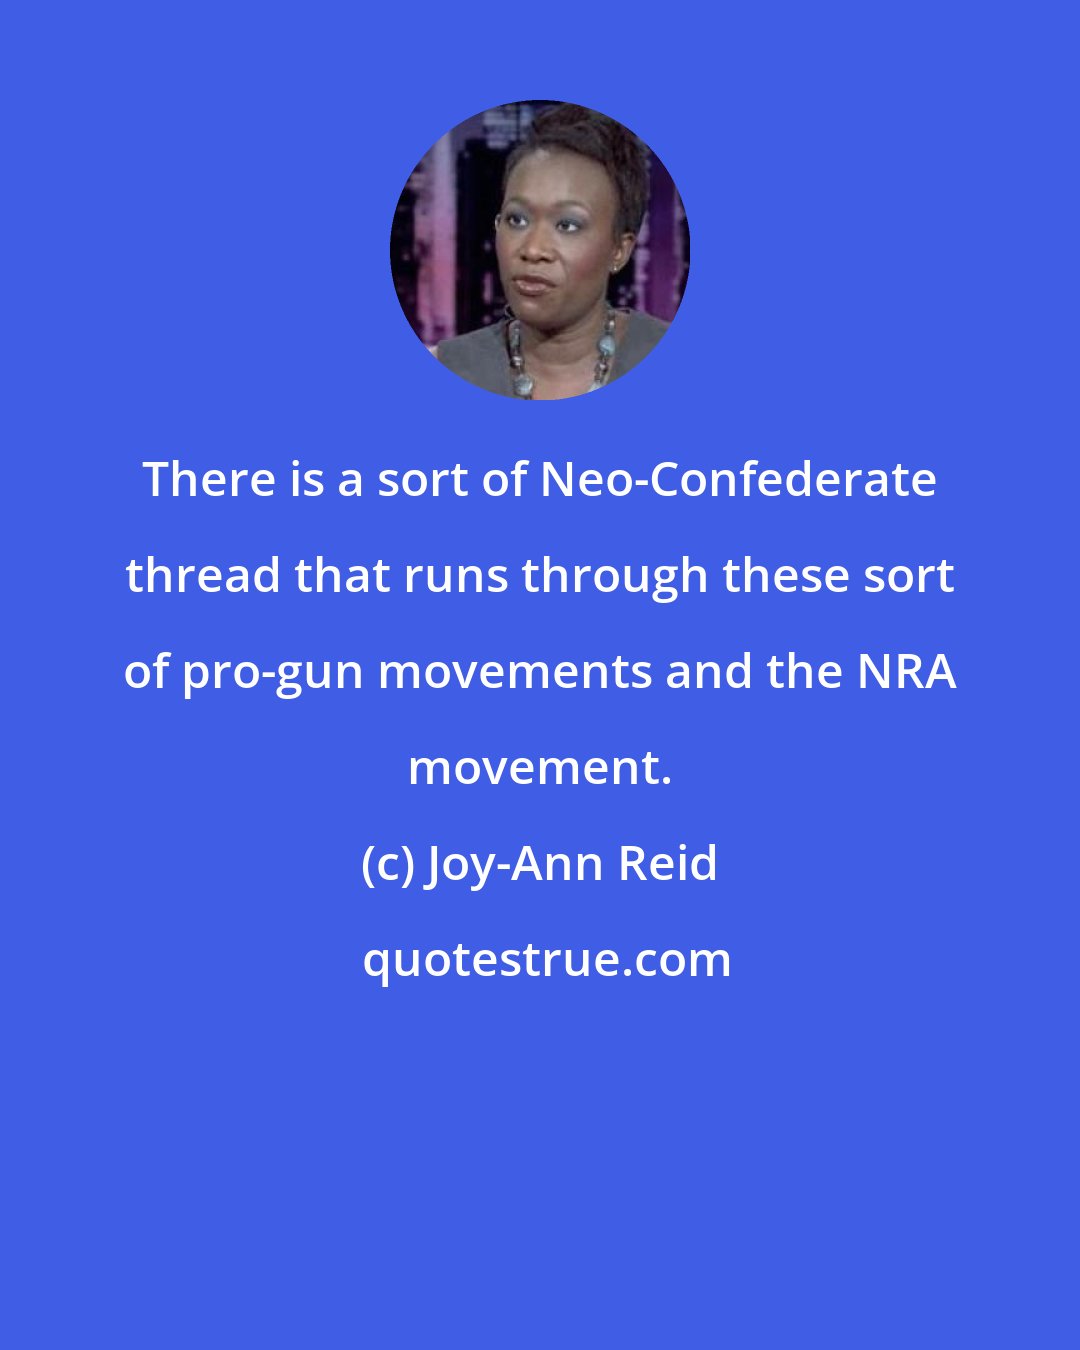 Joy-Ann Reid: There is a sort of Neo-Confederate thread that runs through these sort of pro-gun movements and the NRA movement.